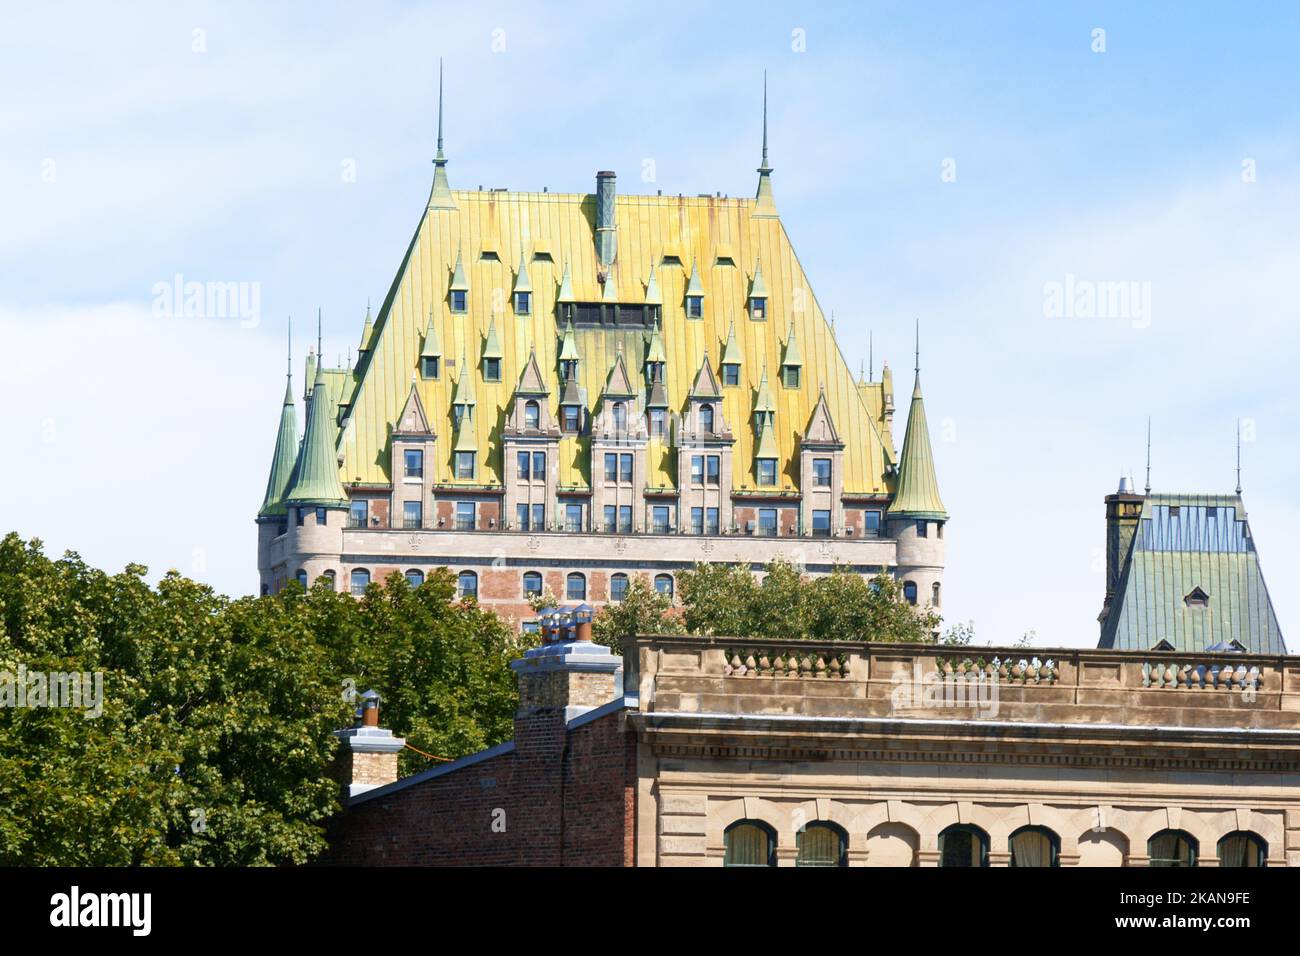 Chateau Frontenac in Quebec City,  Quebec, Canada. This castle like hotel was designed by architect Bruce Price. Stock Photo